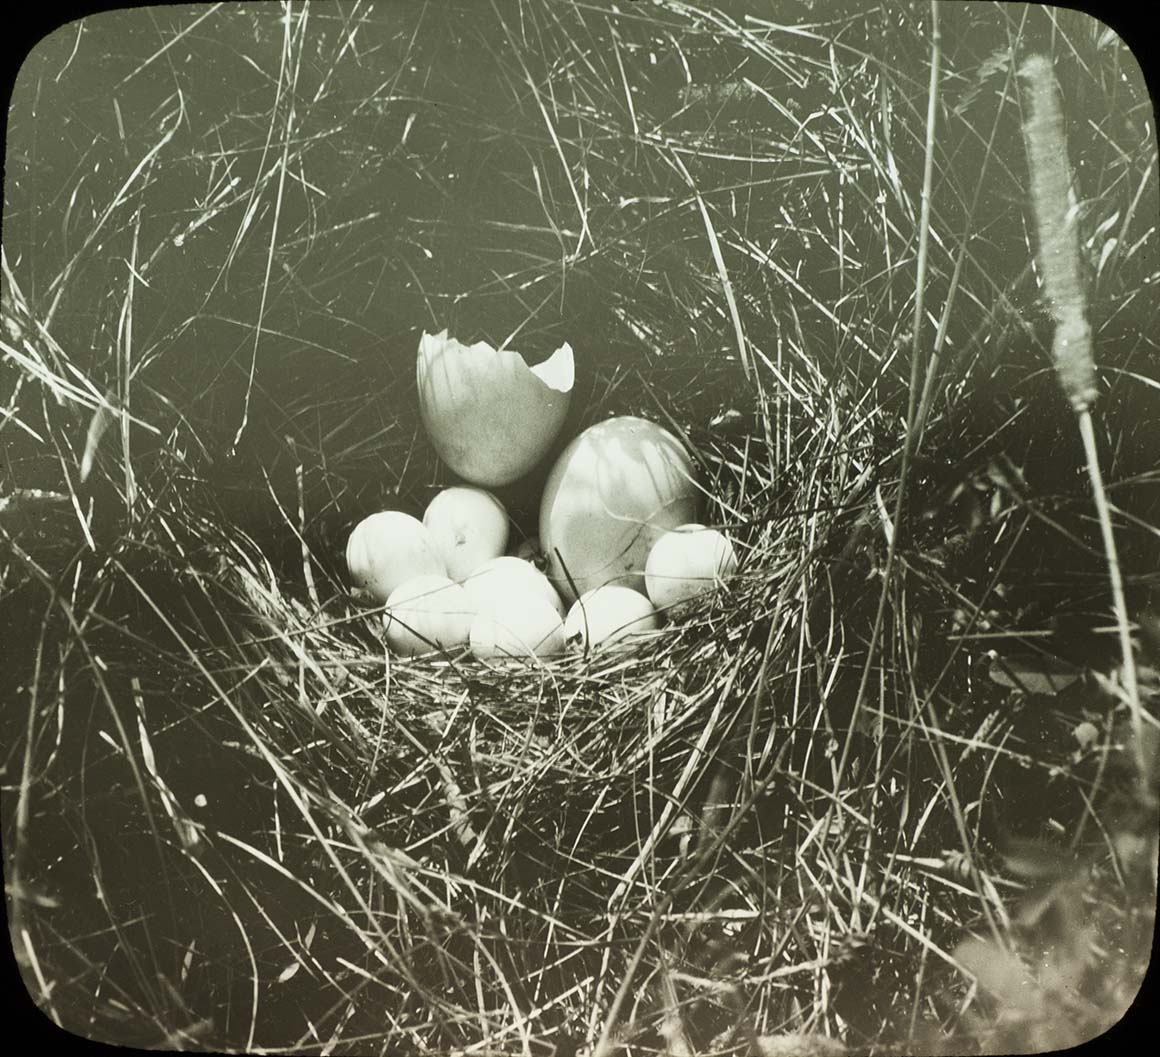 Lantern slide and photograph of eggs in a Northern Bobwhite nest